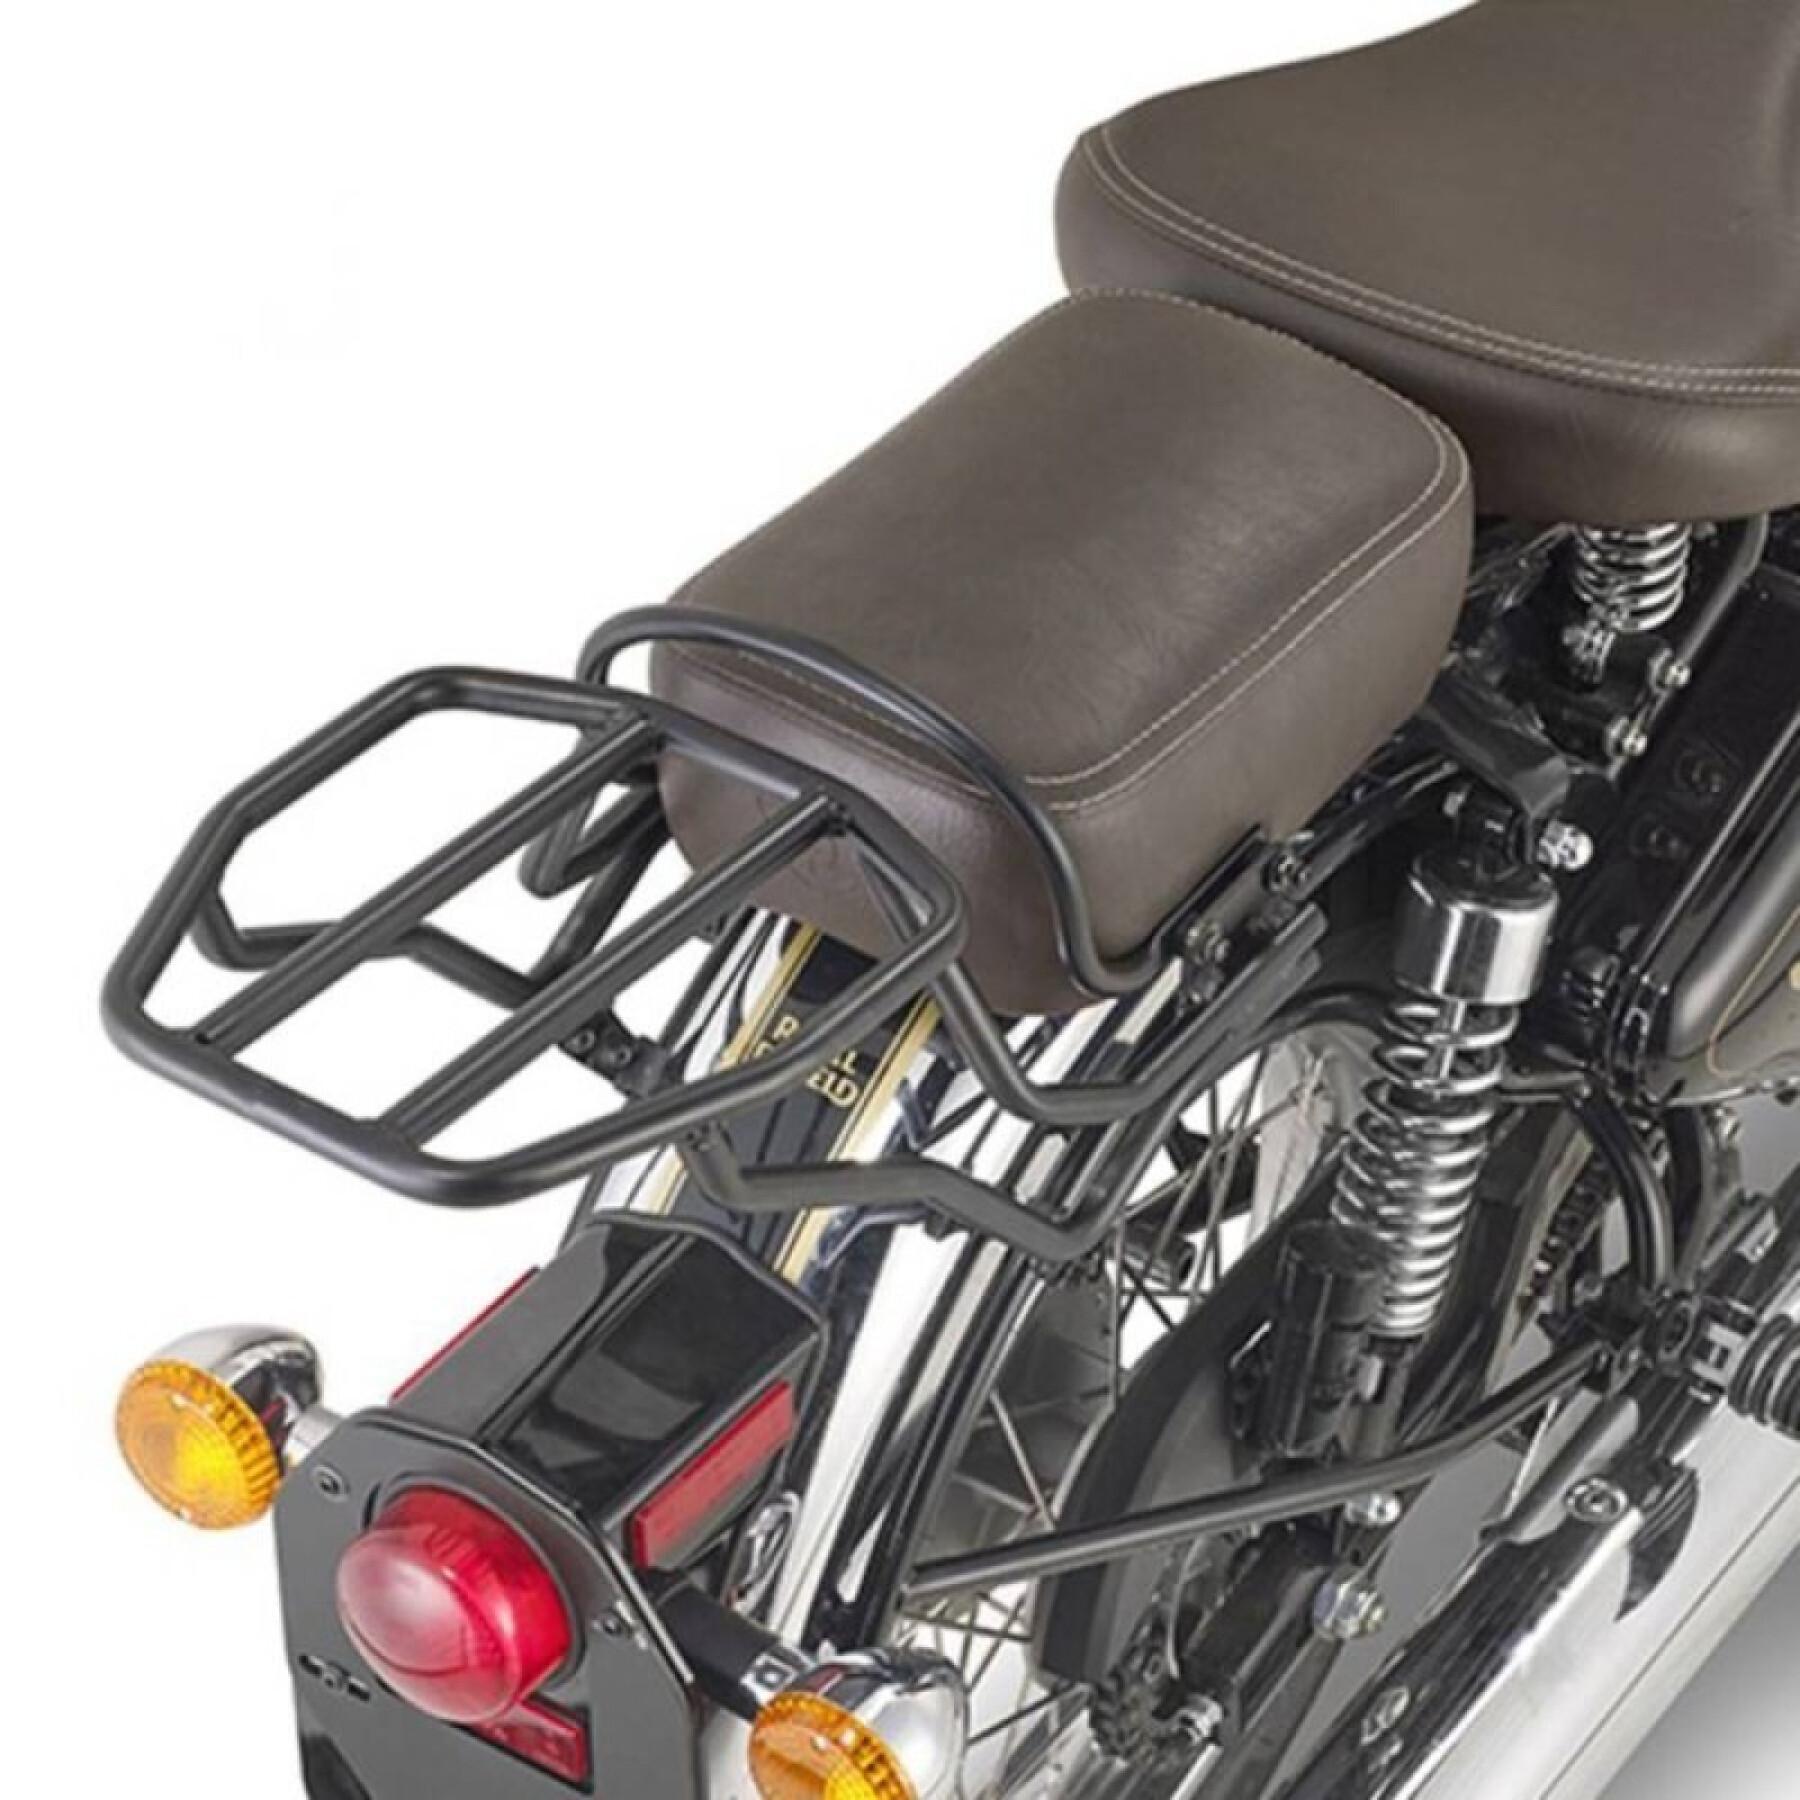 Top case support with saddle pass Kappa Royal Enfield CLASSIC 500 1